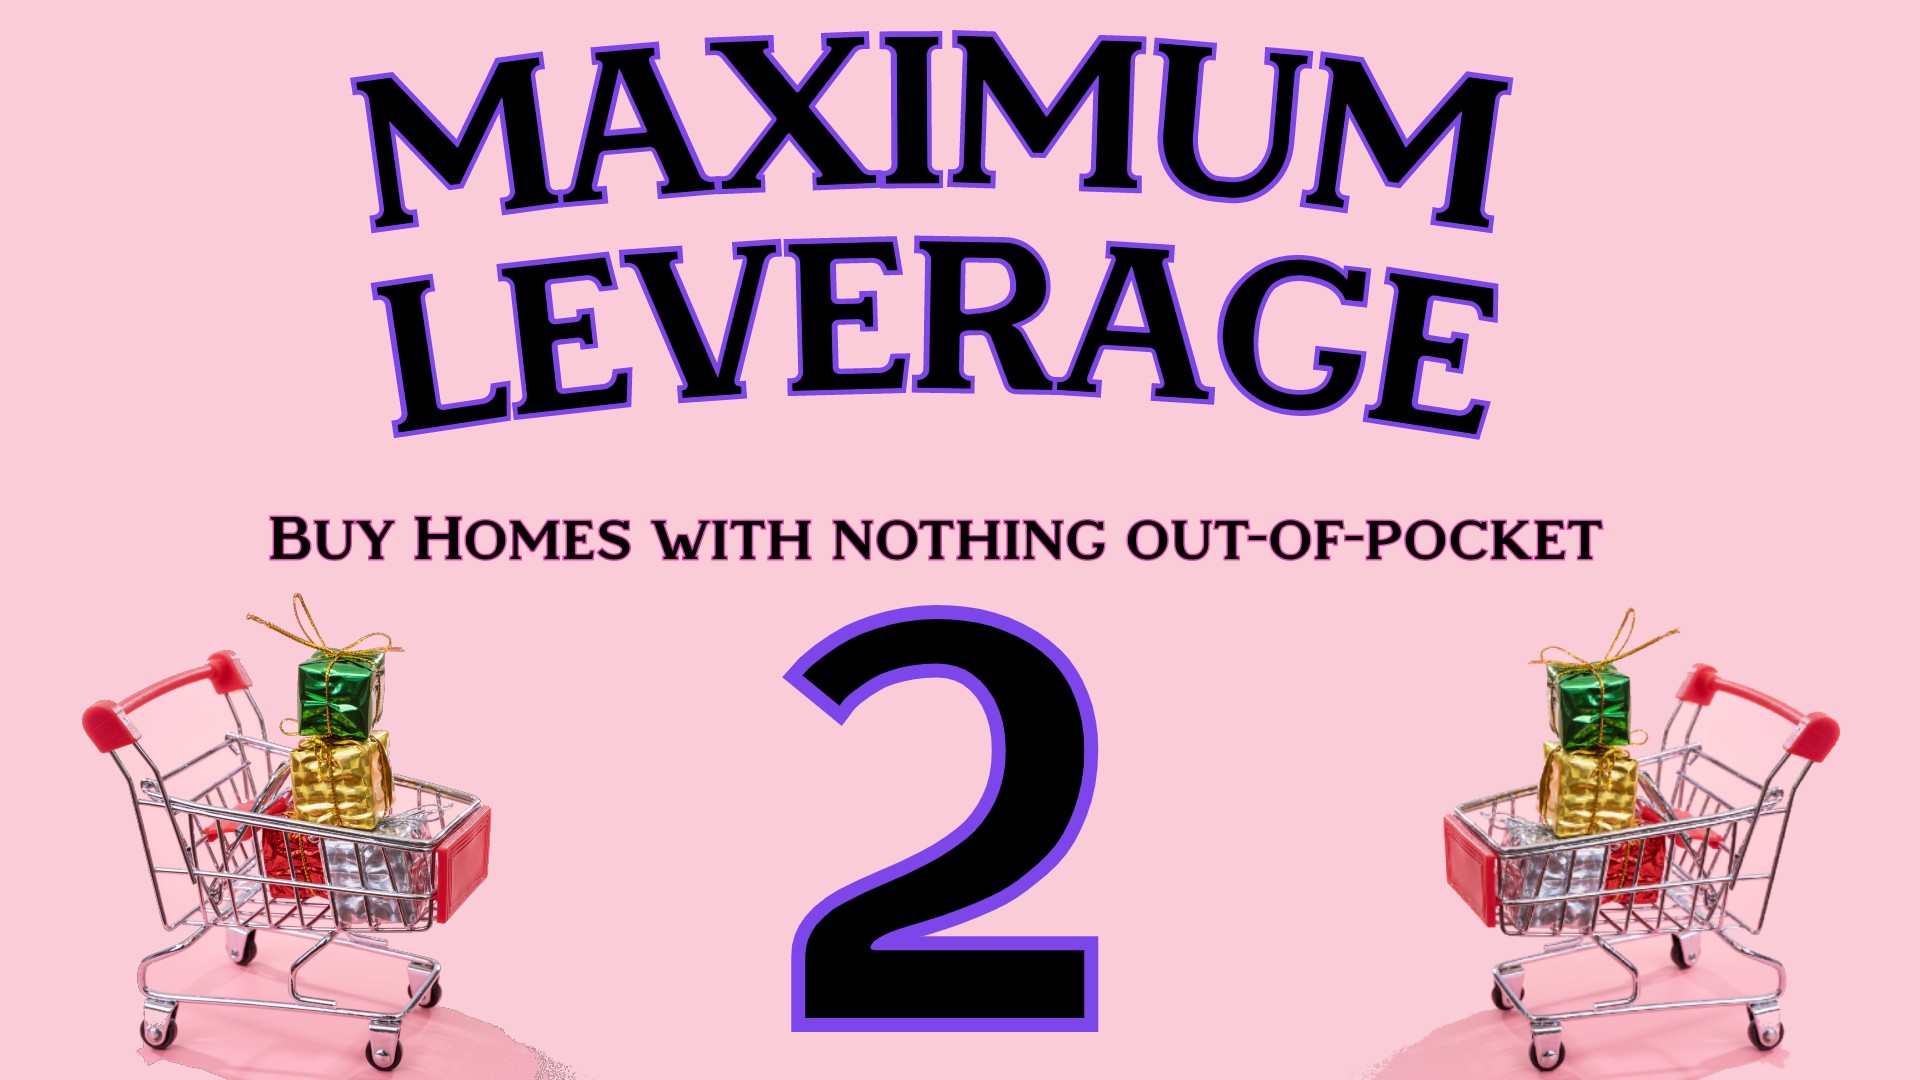 Maximum Leverage 2: Buy Homes with Nothing Out-Of-Pocket